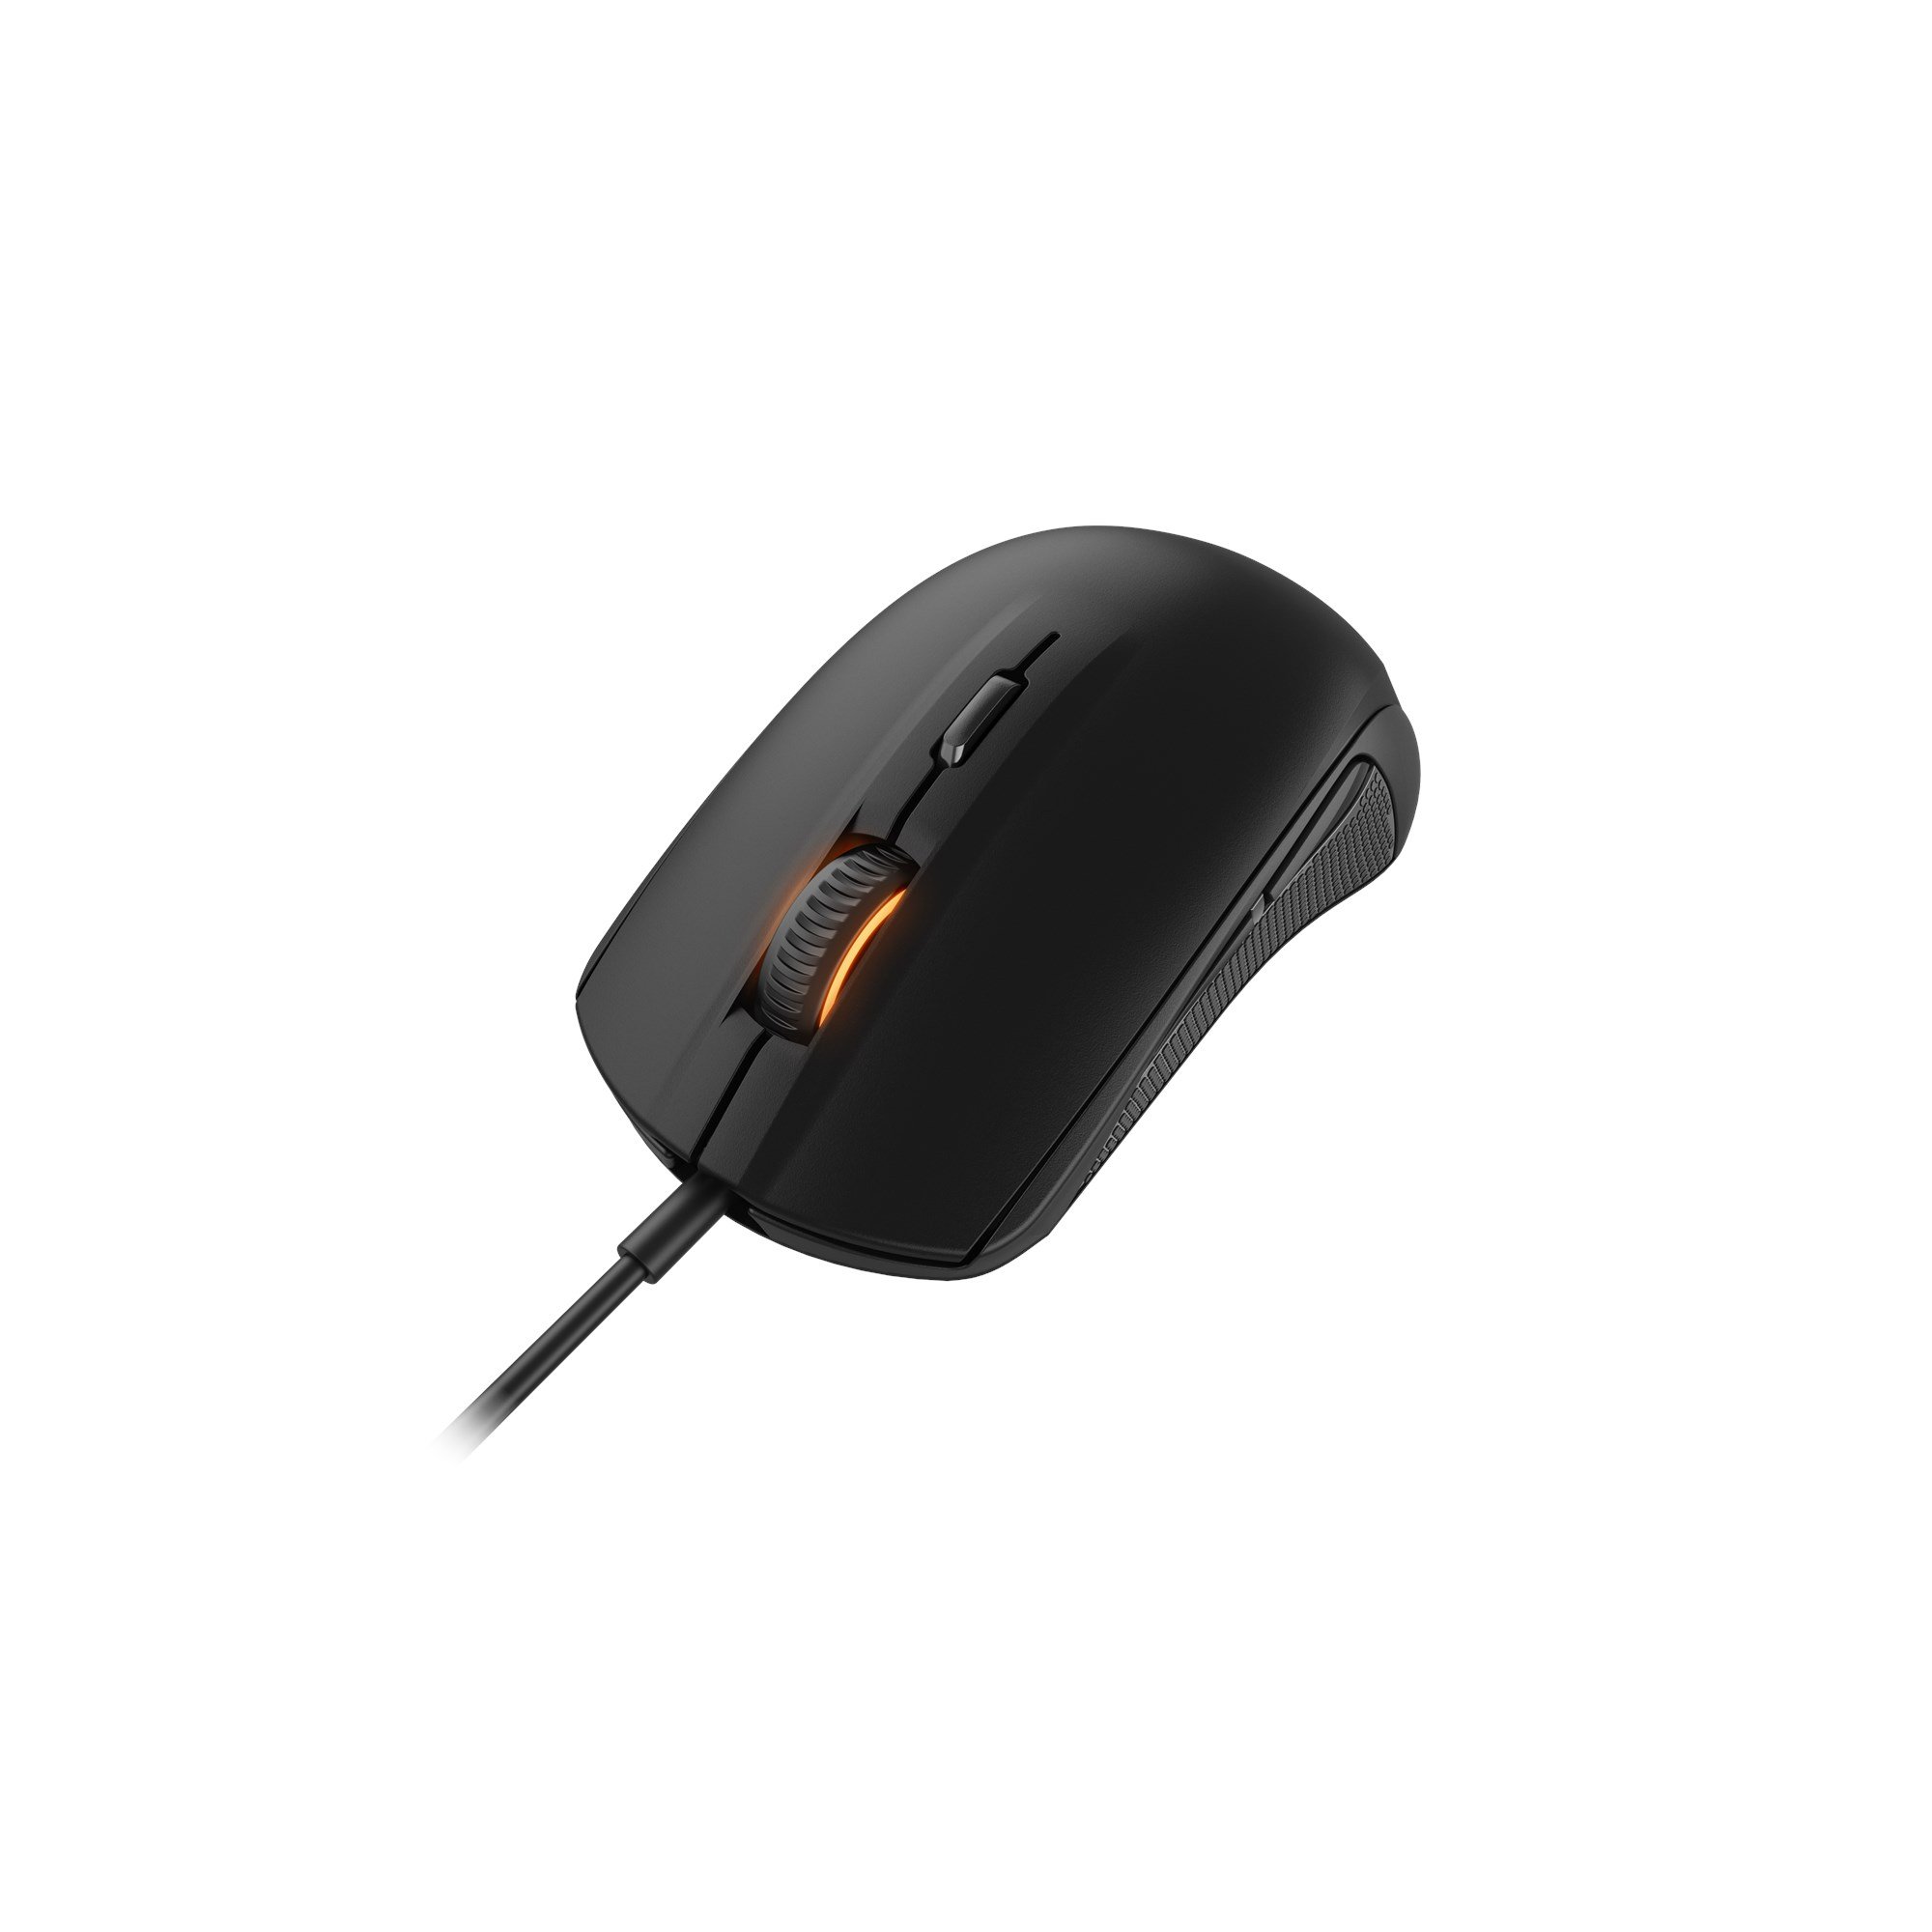 Steelseries rival dota edition фото 54